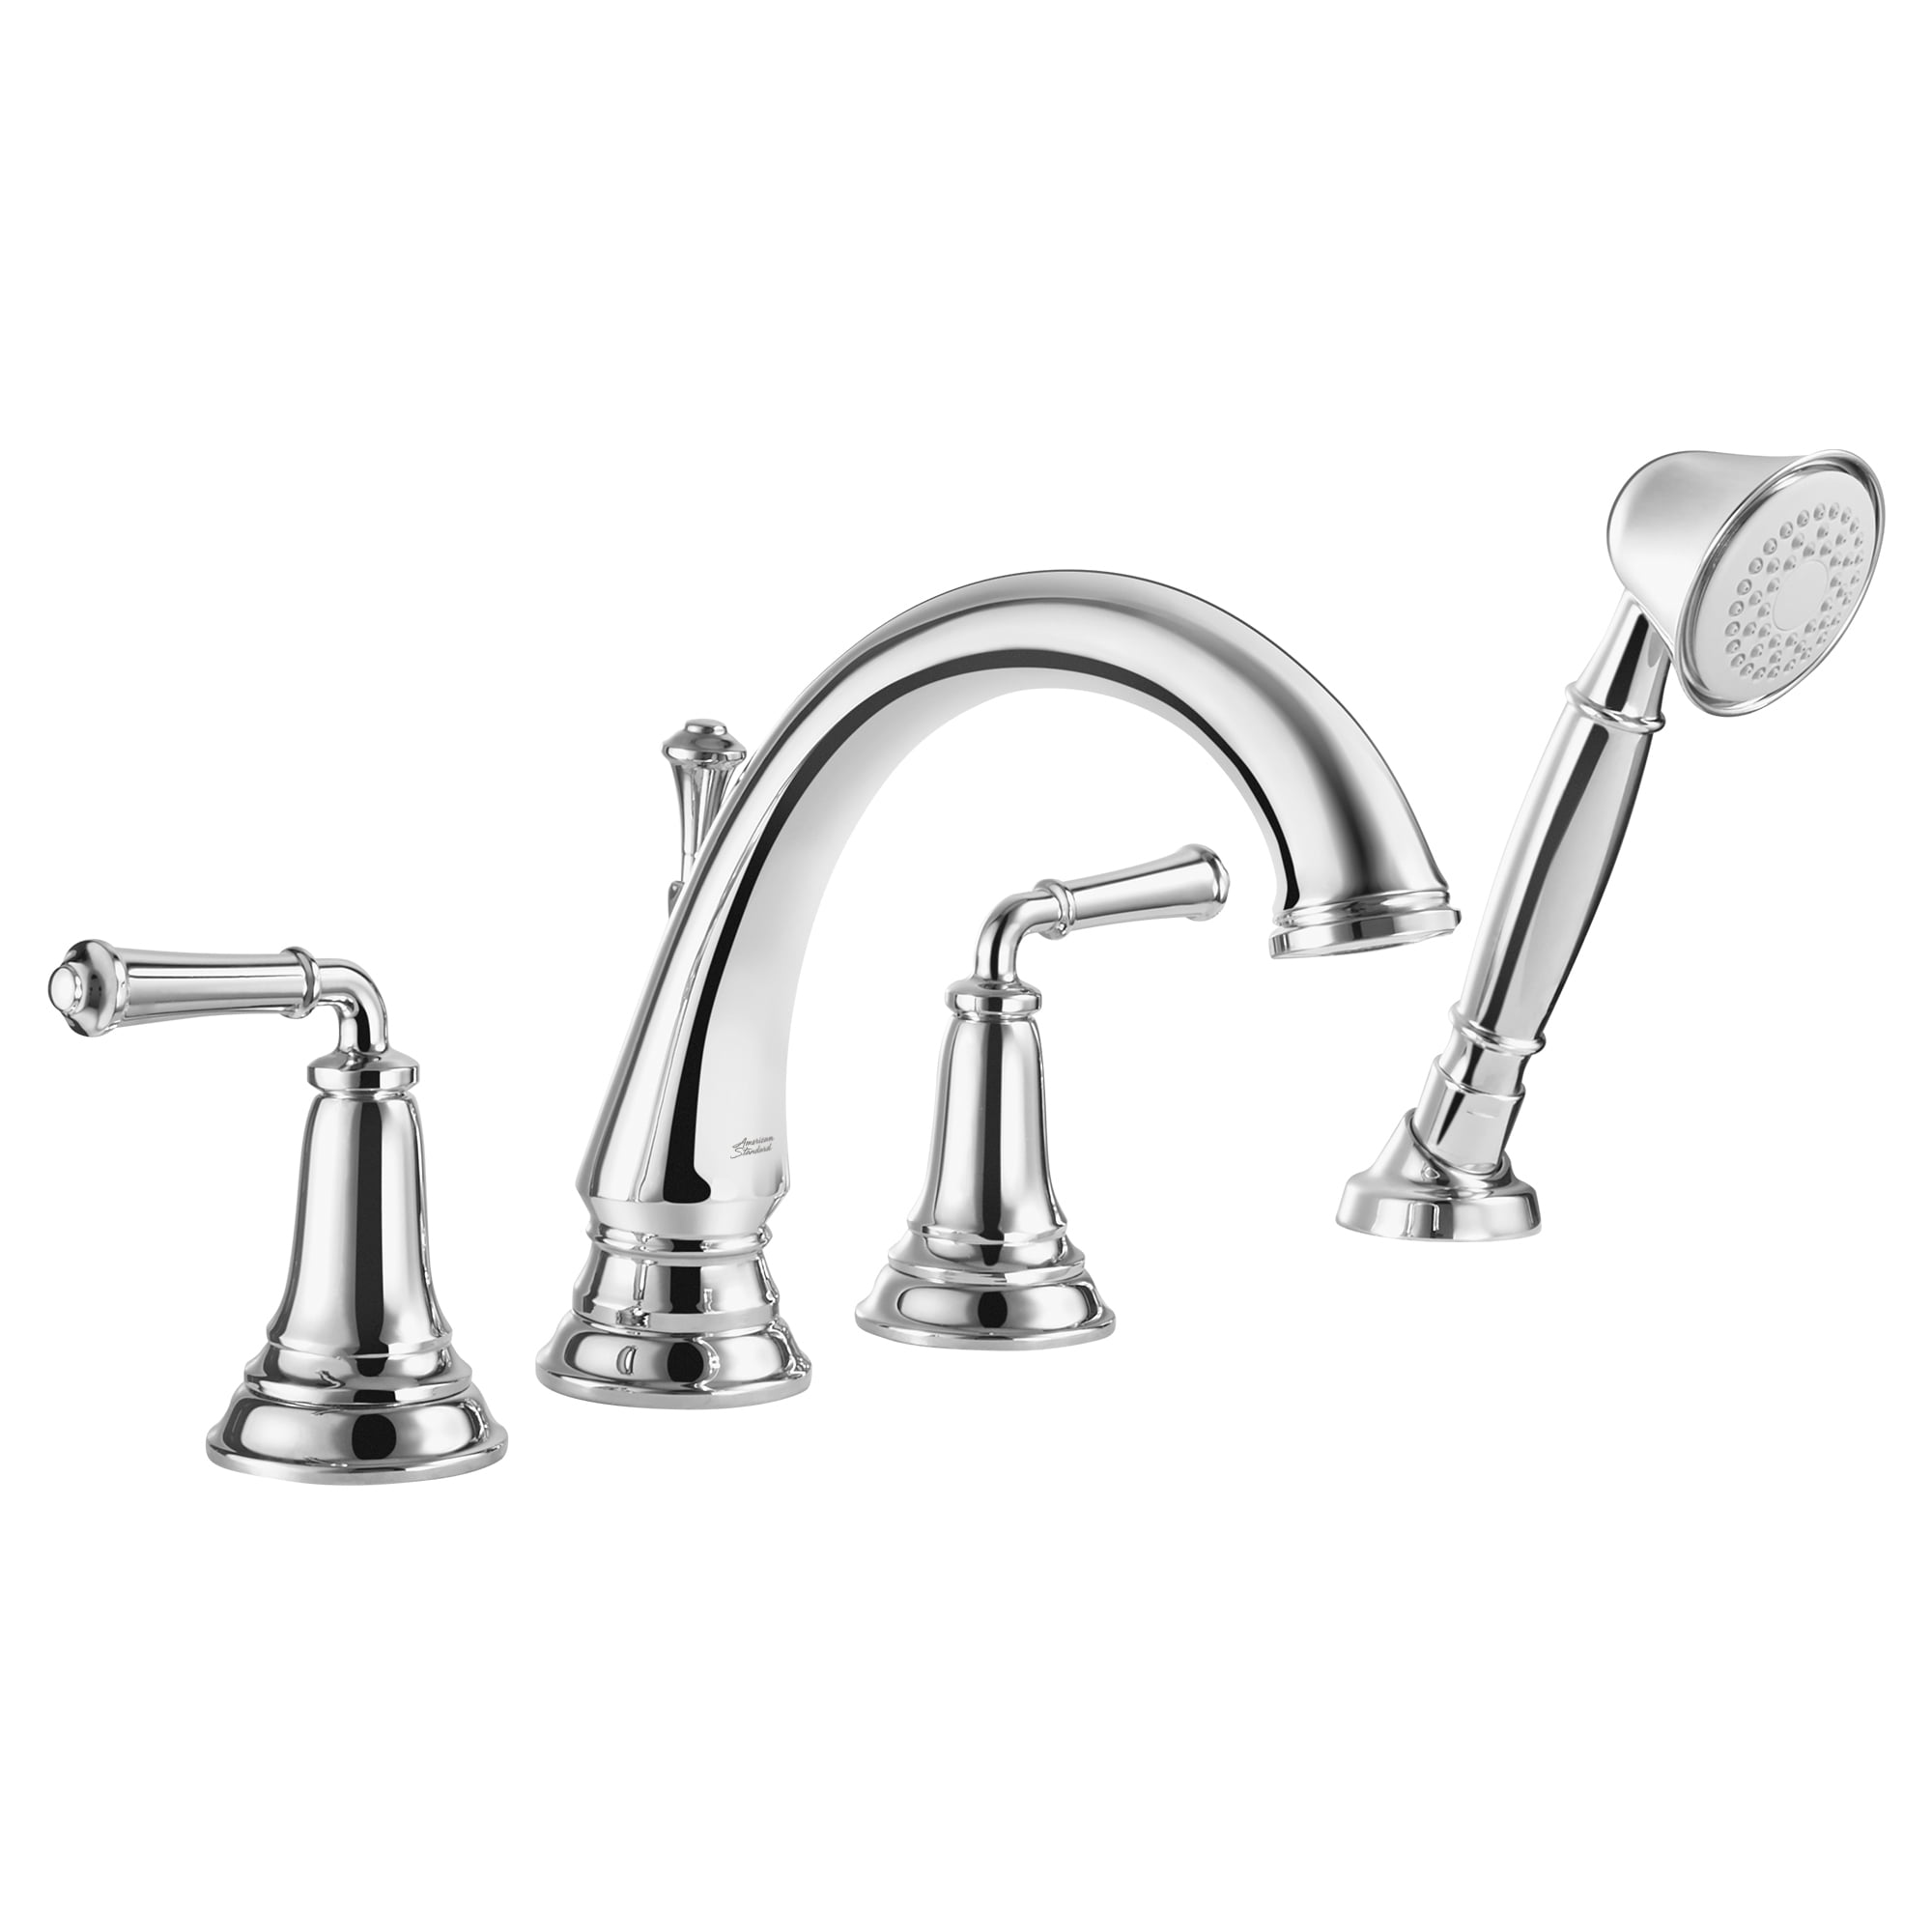 American Standard Delancey 2-Handle Deck-Mount Roman Tub Faucet with American Standard Two Handle Shower Faucet